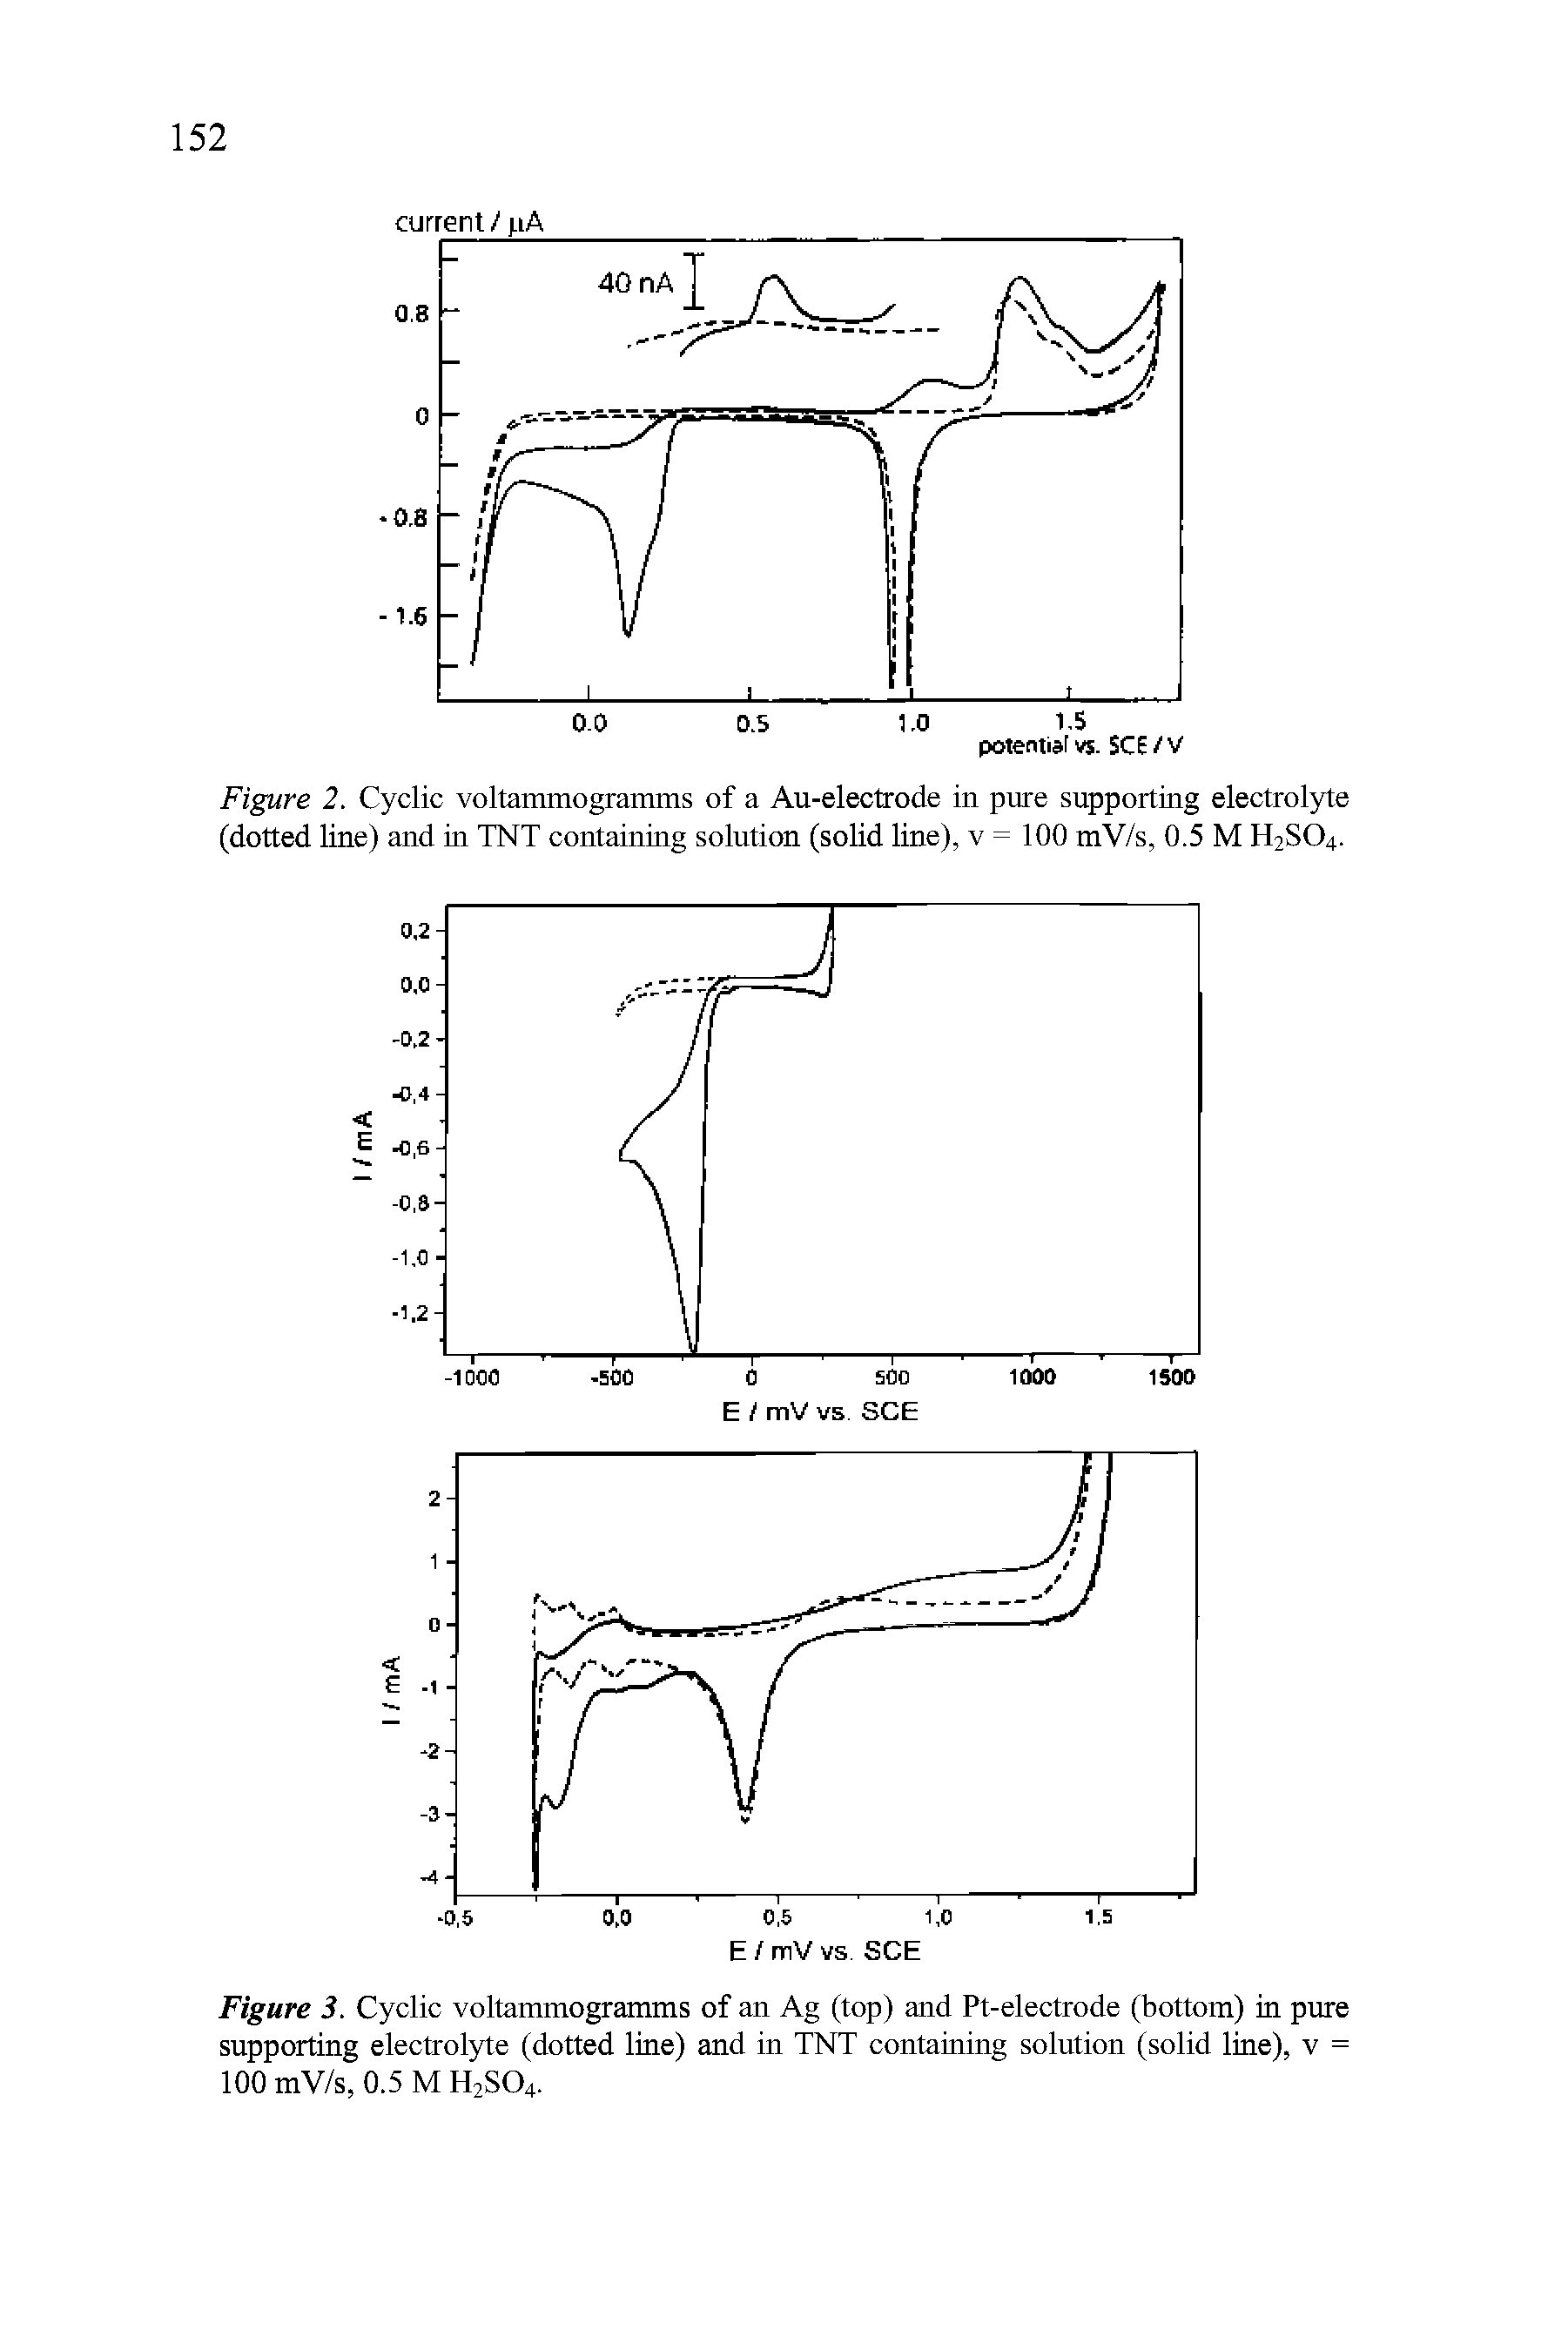 Figure 2. Cyclic voltammogramms of a Au-electrode in pure supporting electrolyte (dotted line) and in TNT containing solution (solid line), v = 100 mV/s, 0.5 M H2SO4.